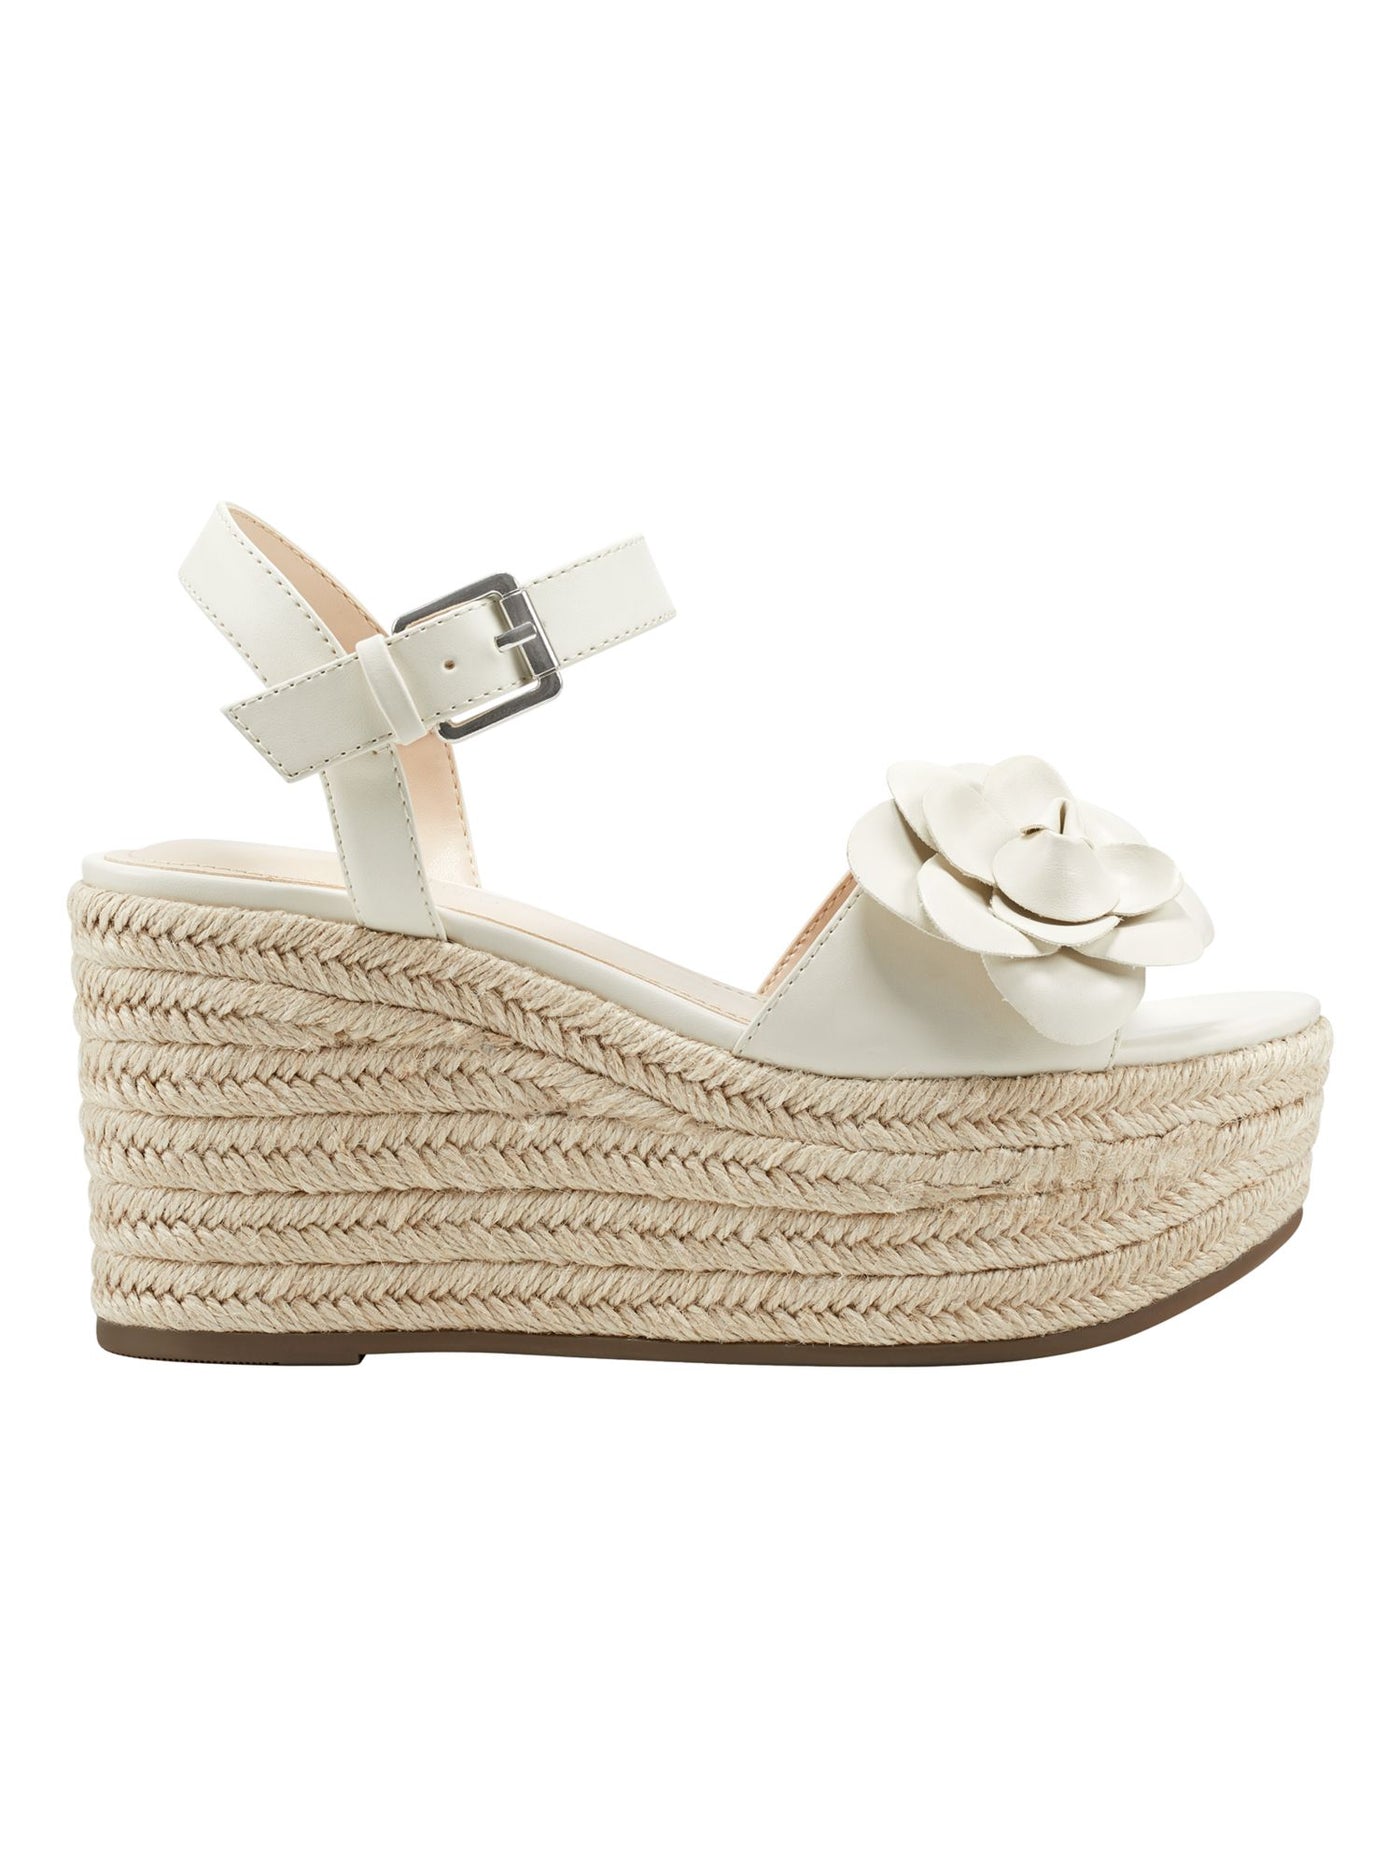 MARC FISHER Womens Ivory Padded Woven Flower Adjustable Strap Ankle Strap Venom Almond Toe Wedge Buckle Espadrille Shoes 6 M